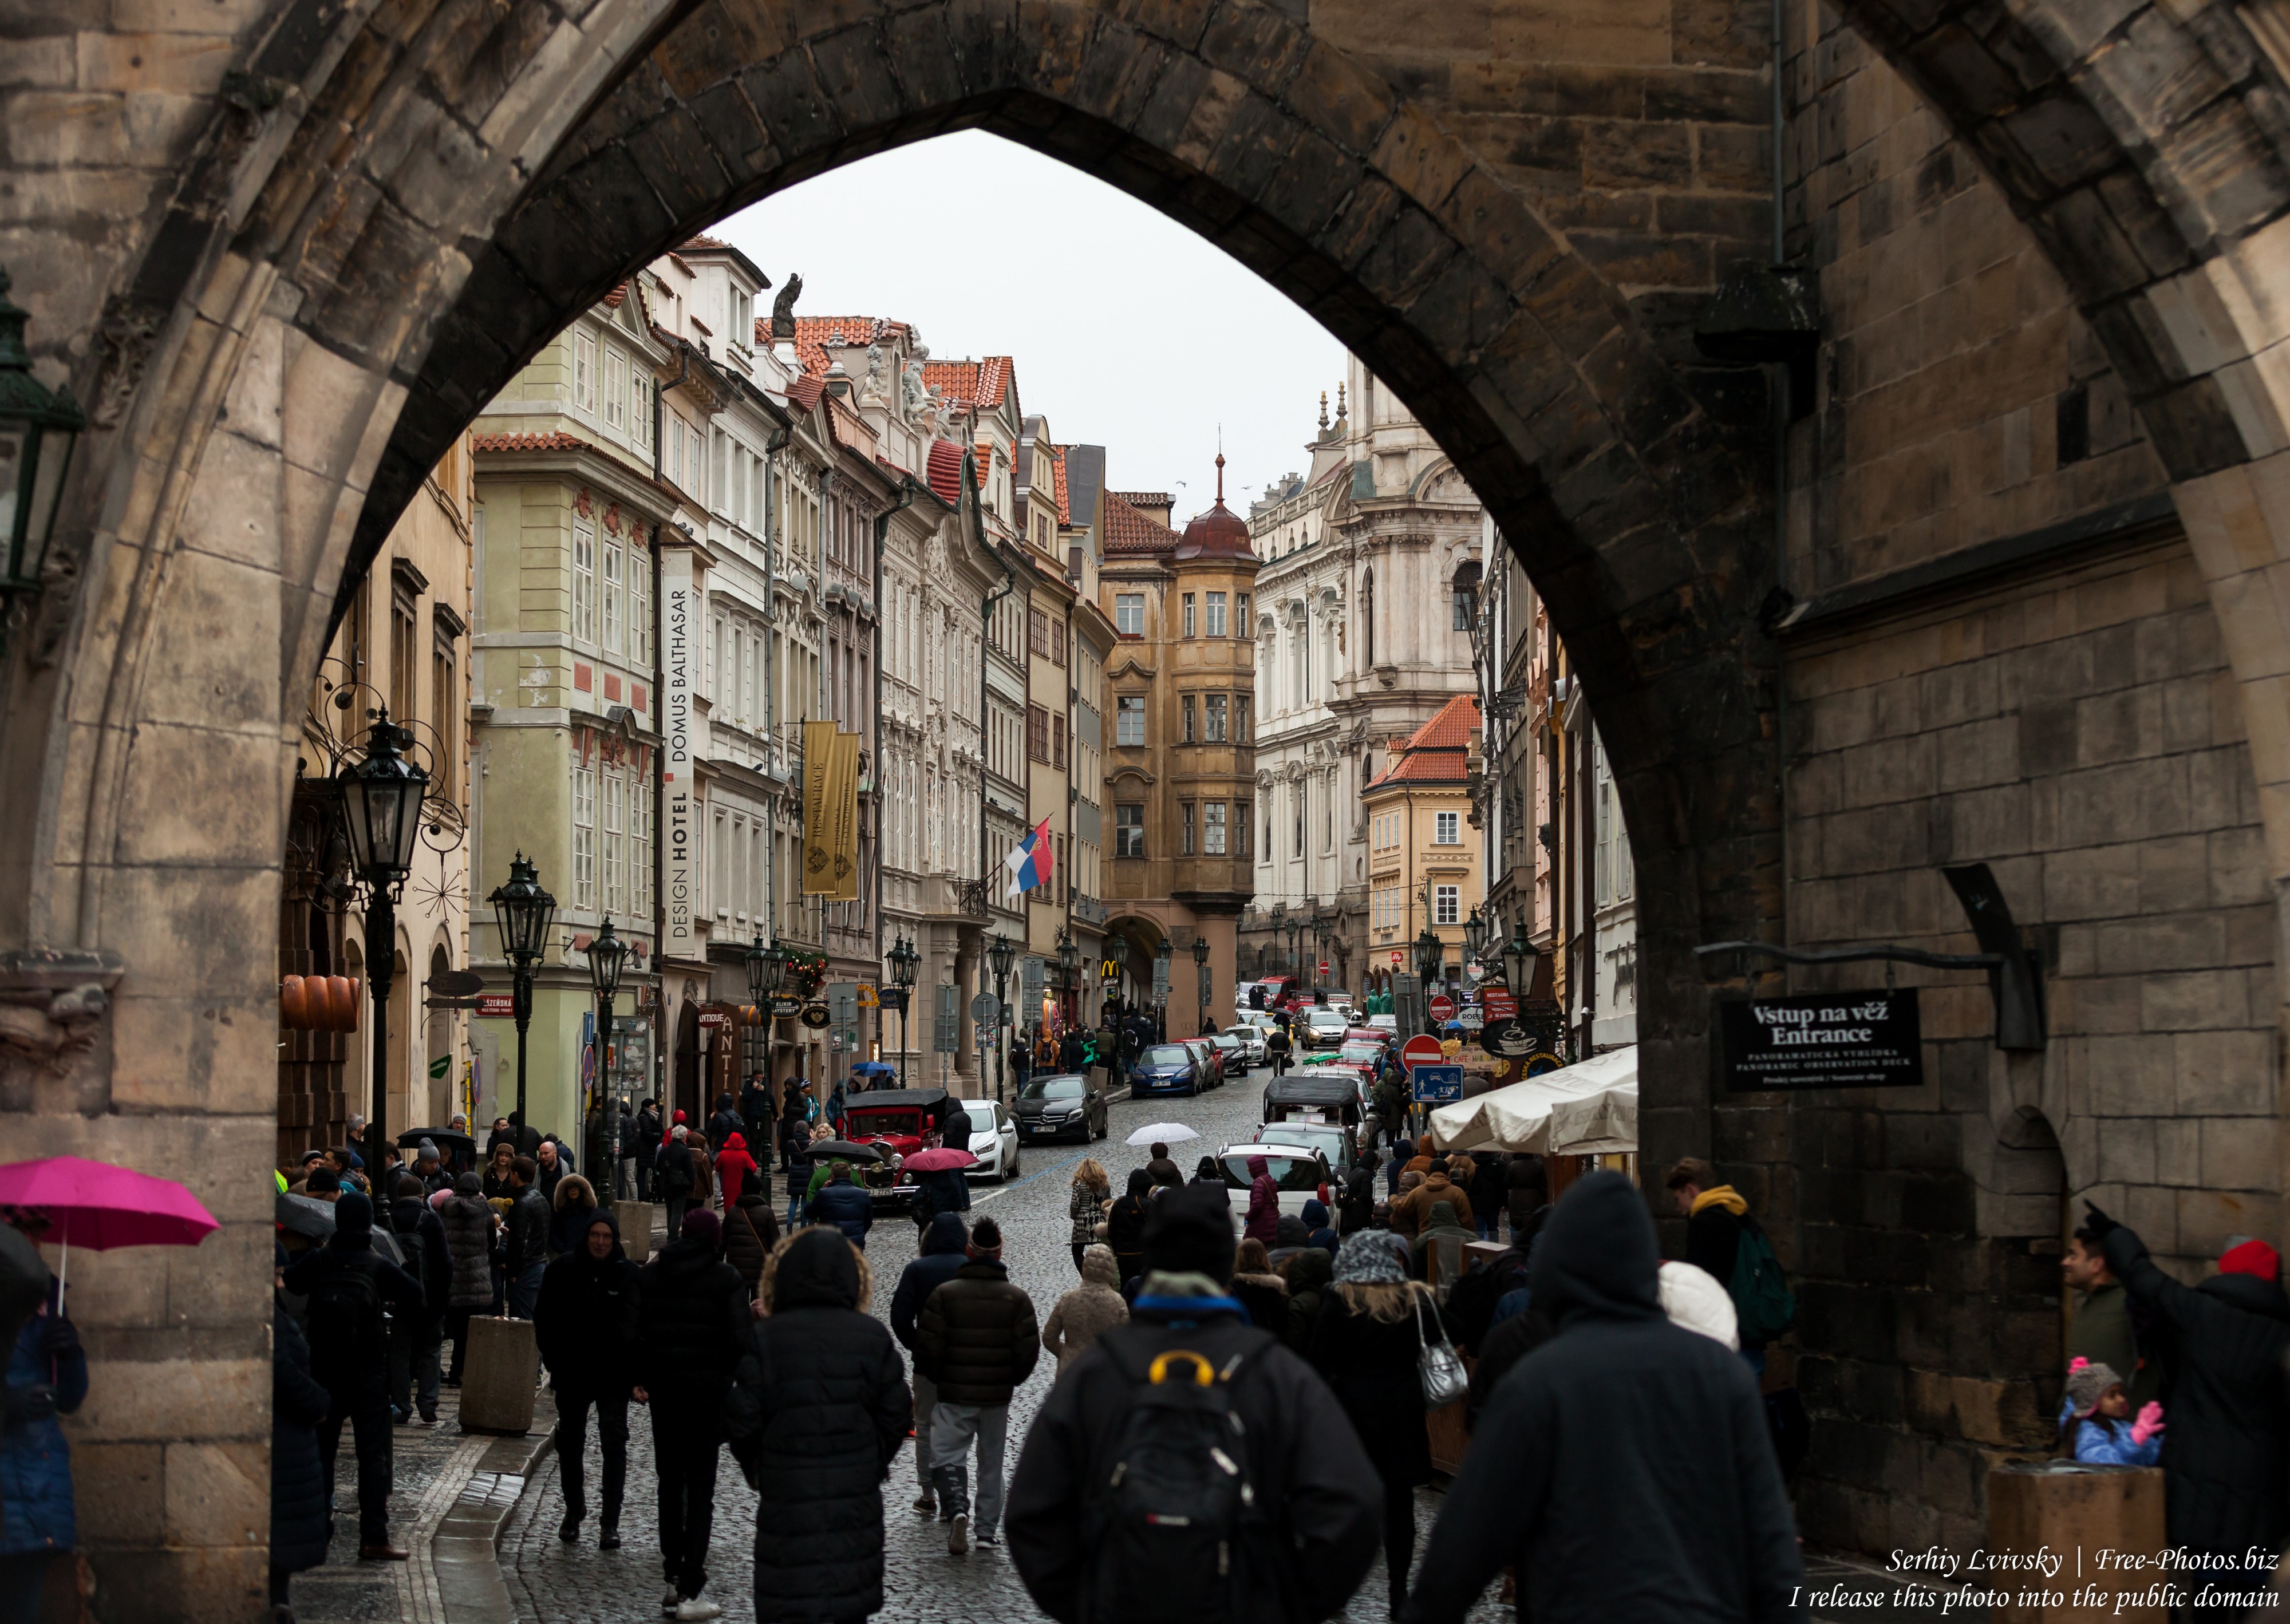 Prague, Czech Republic, in January 2018, photographed by Serhiy Lvivsky, picture 19